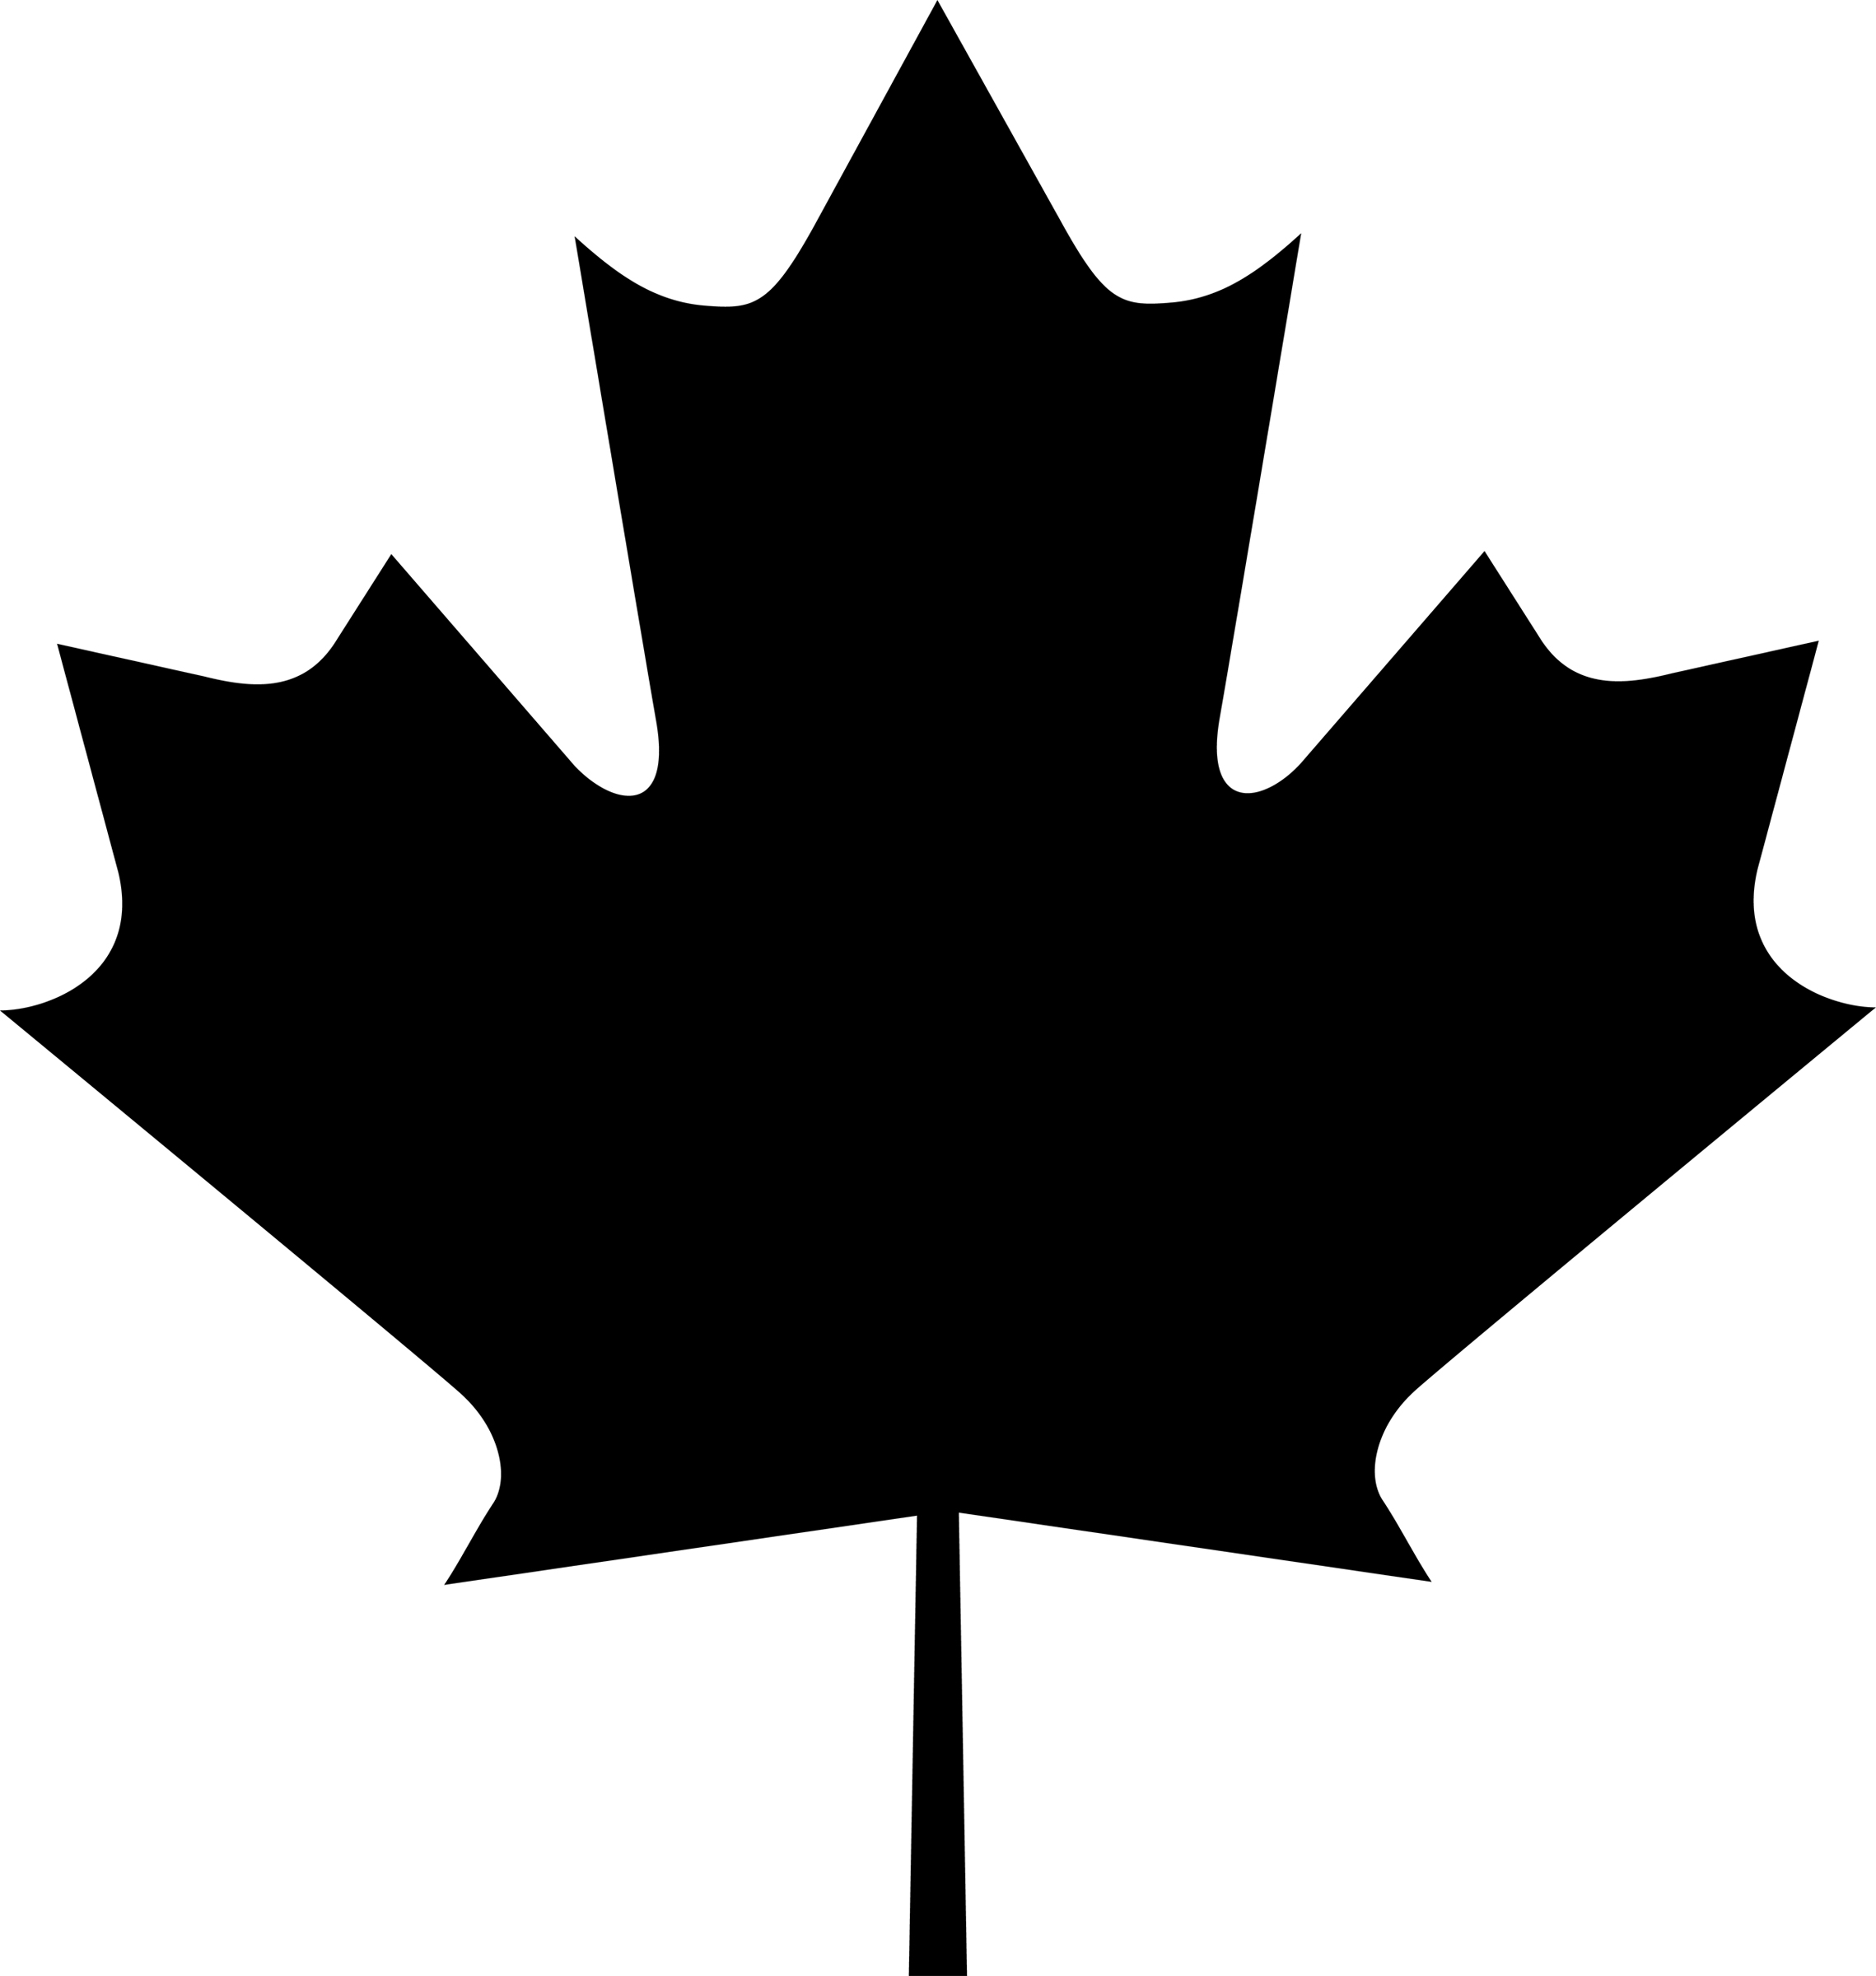 Maple Leaf Black And White Clipart